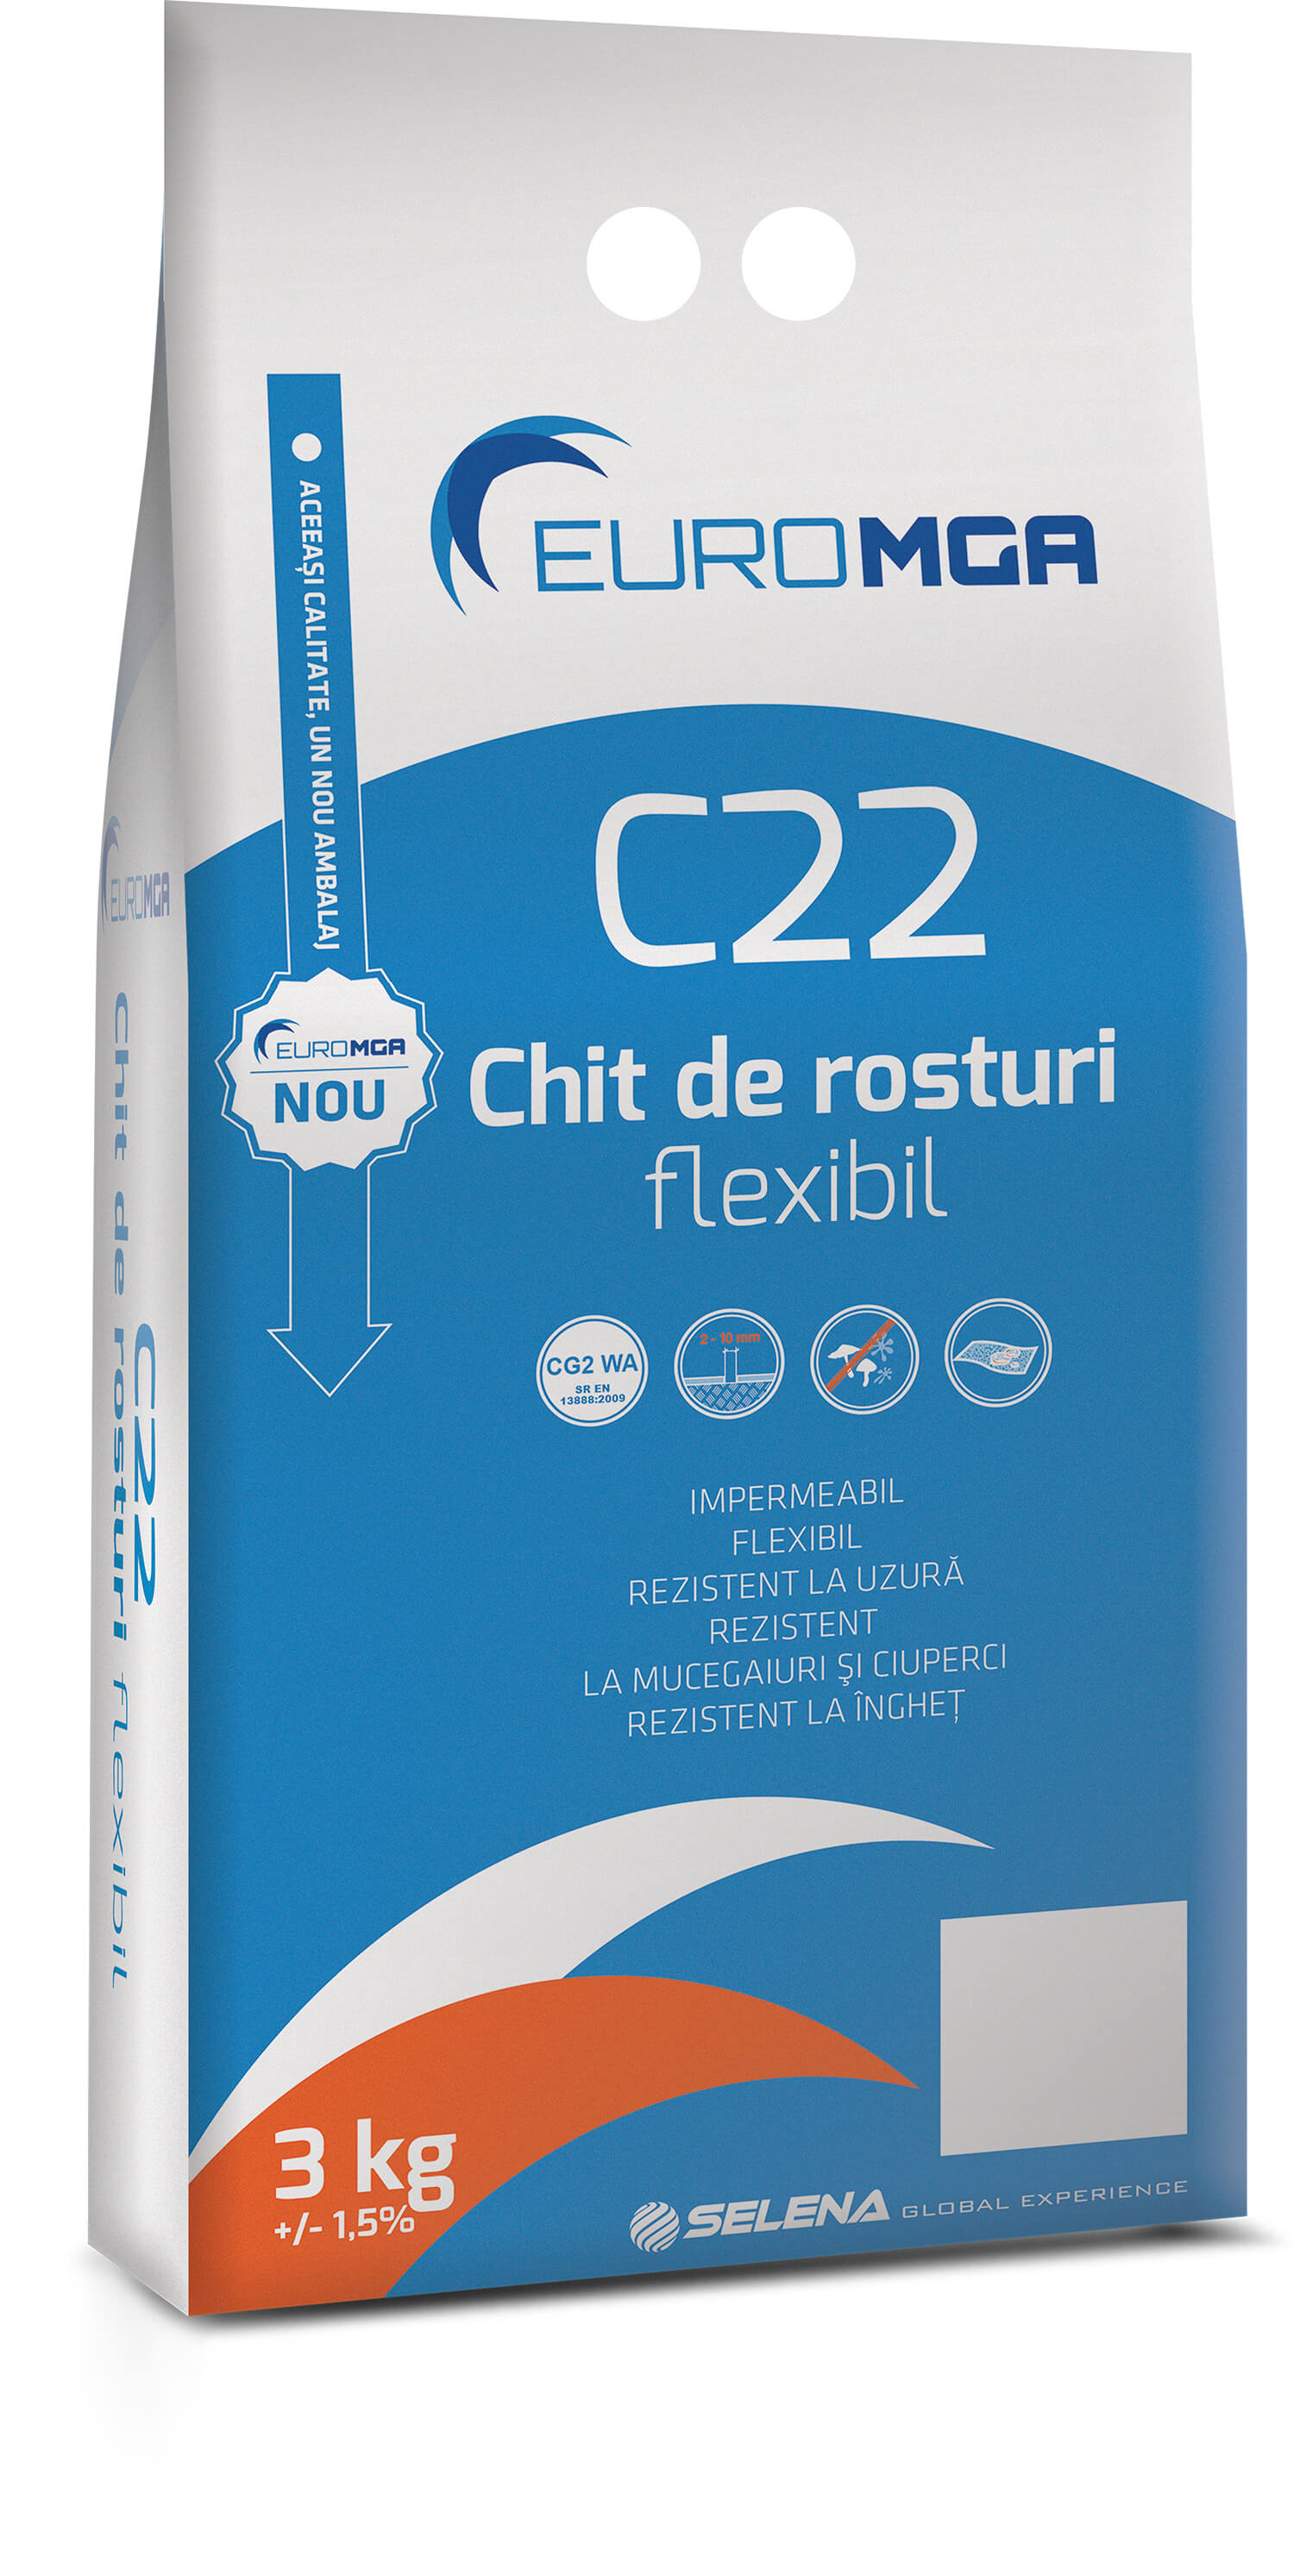 Joints - Flexible champagne grout C22 EuroMGA 3kg, maxbau.ro